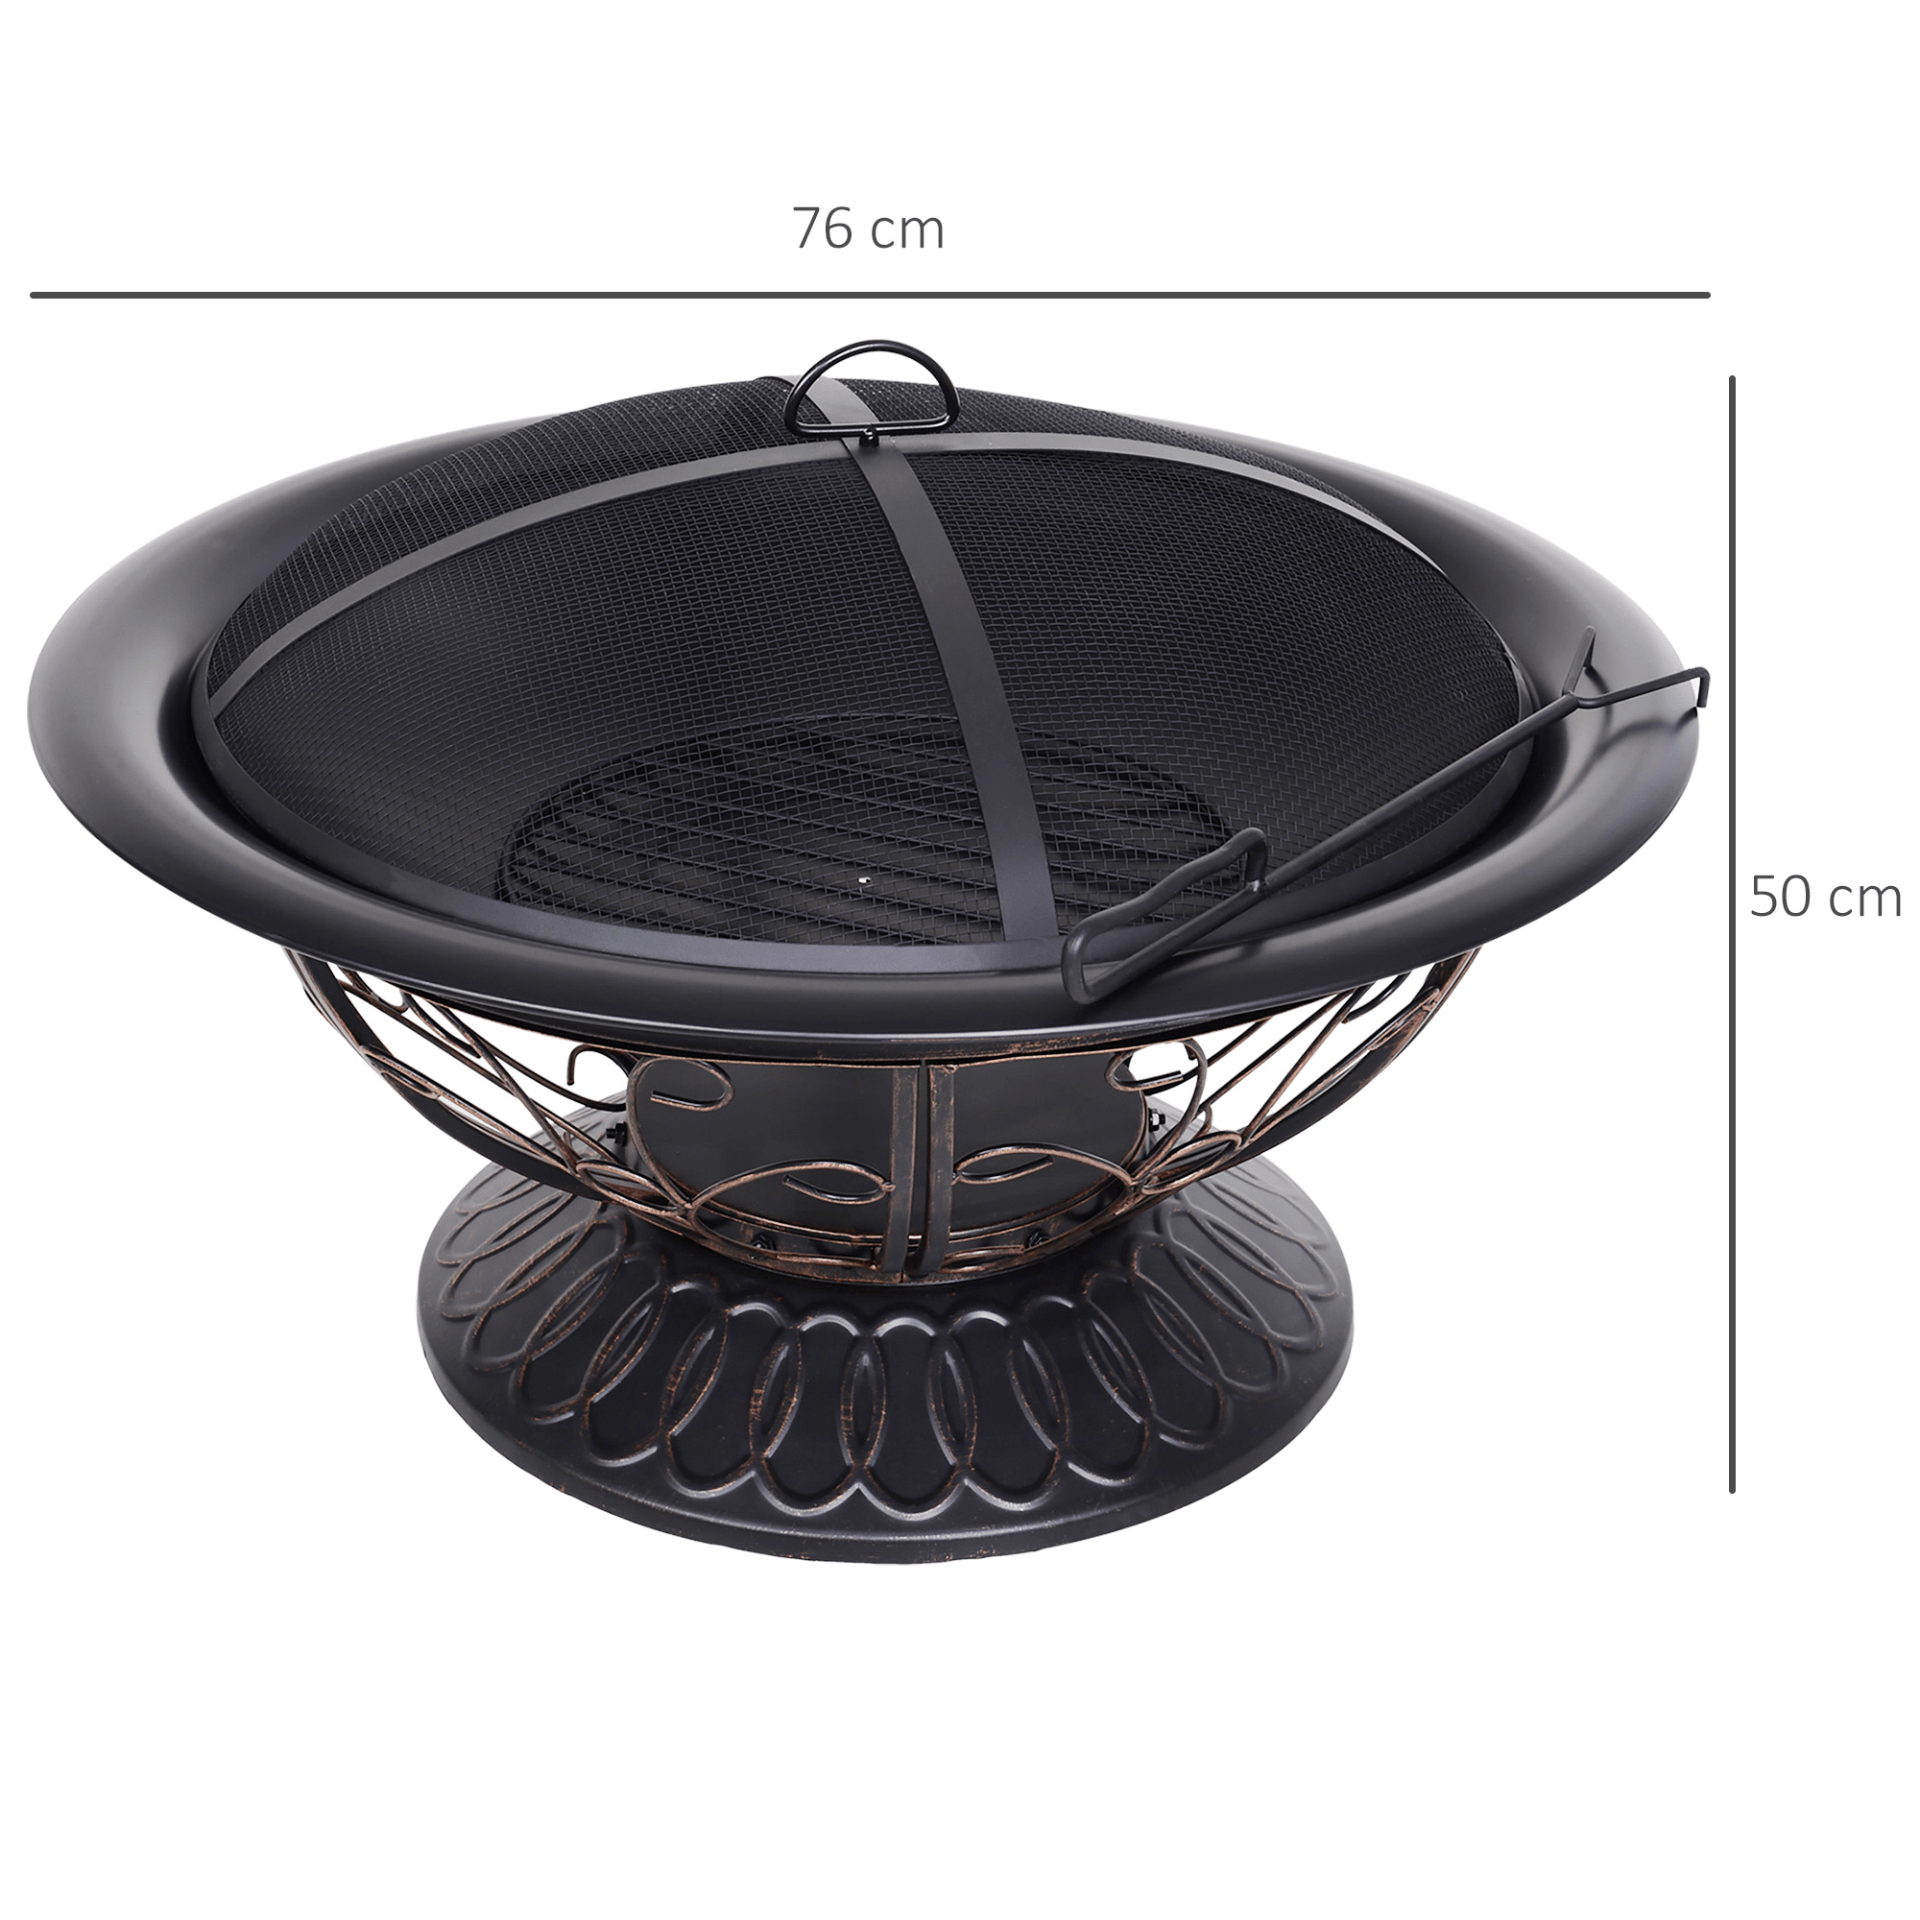 Outsunny Metal Large Firepit Bowl Outdoor Round Fire Pit Brazier with Lid, Log Grate, Poker, Elegant Scrolls - 76 x 76 x 50cm, Black Firepit Cosy Camping Co.   